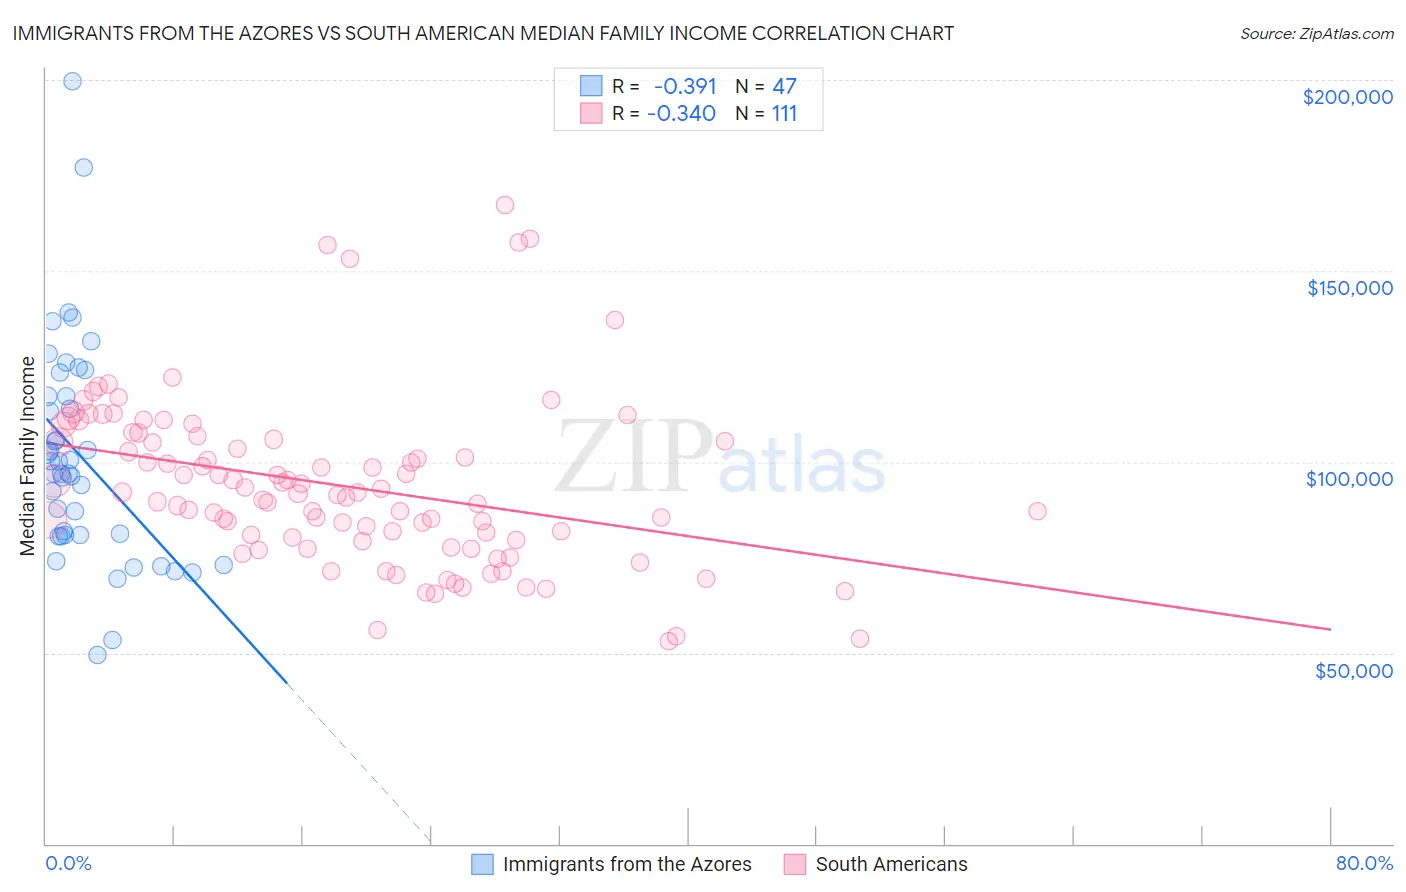 Immigrants from the Azores vs South American Median Family Income